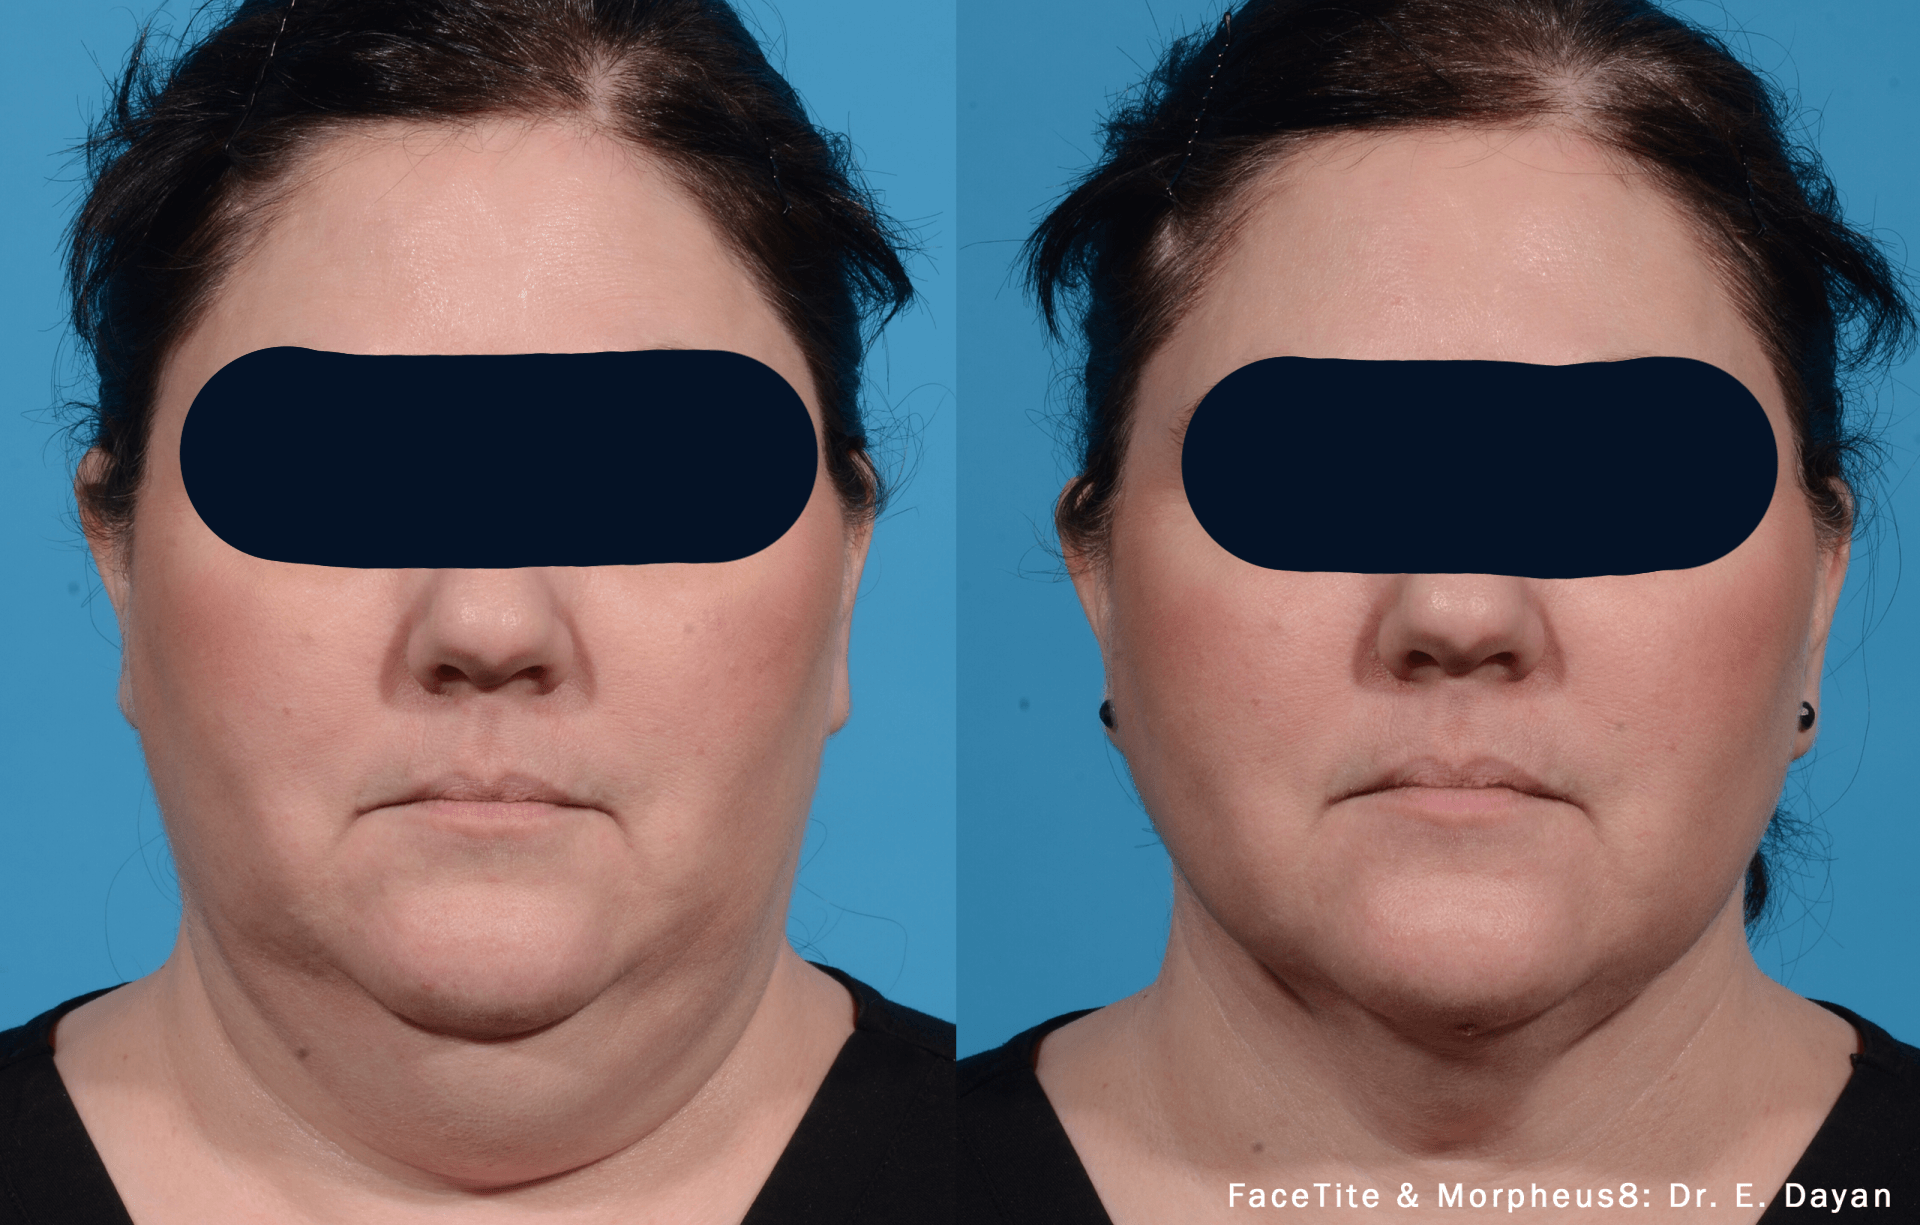 woman's under-chin before and after FaceTite treatment